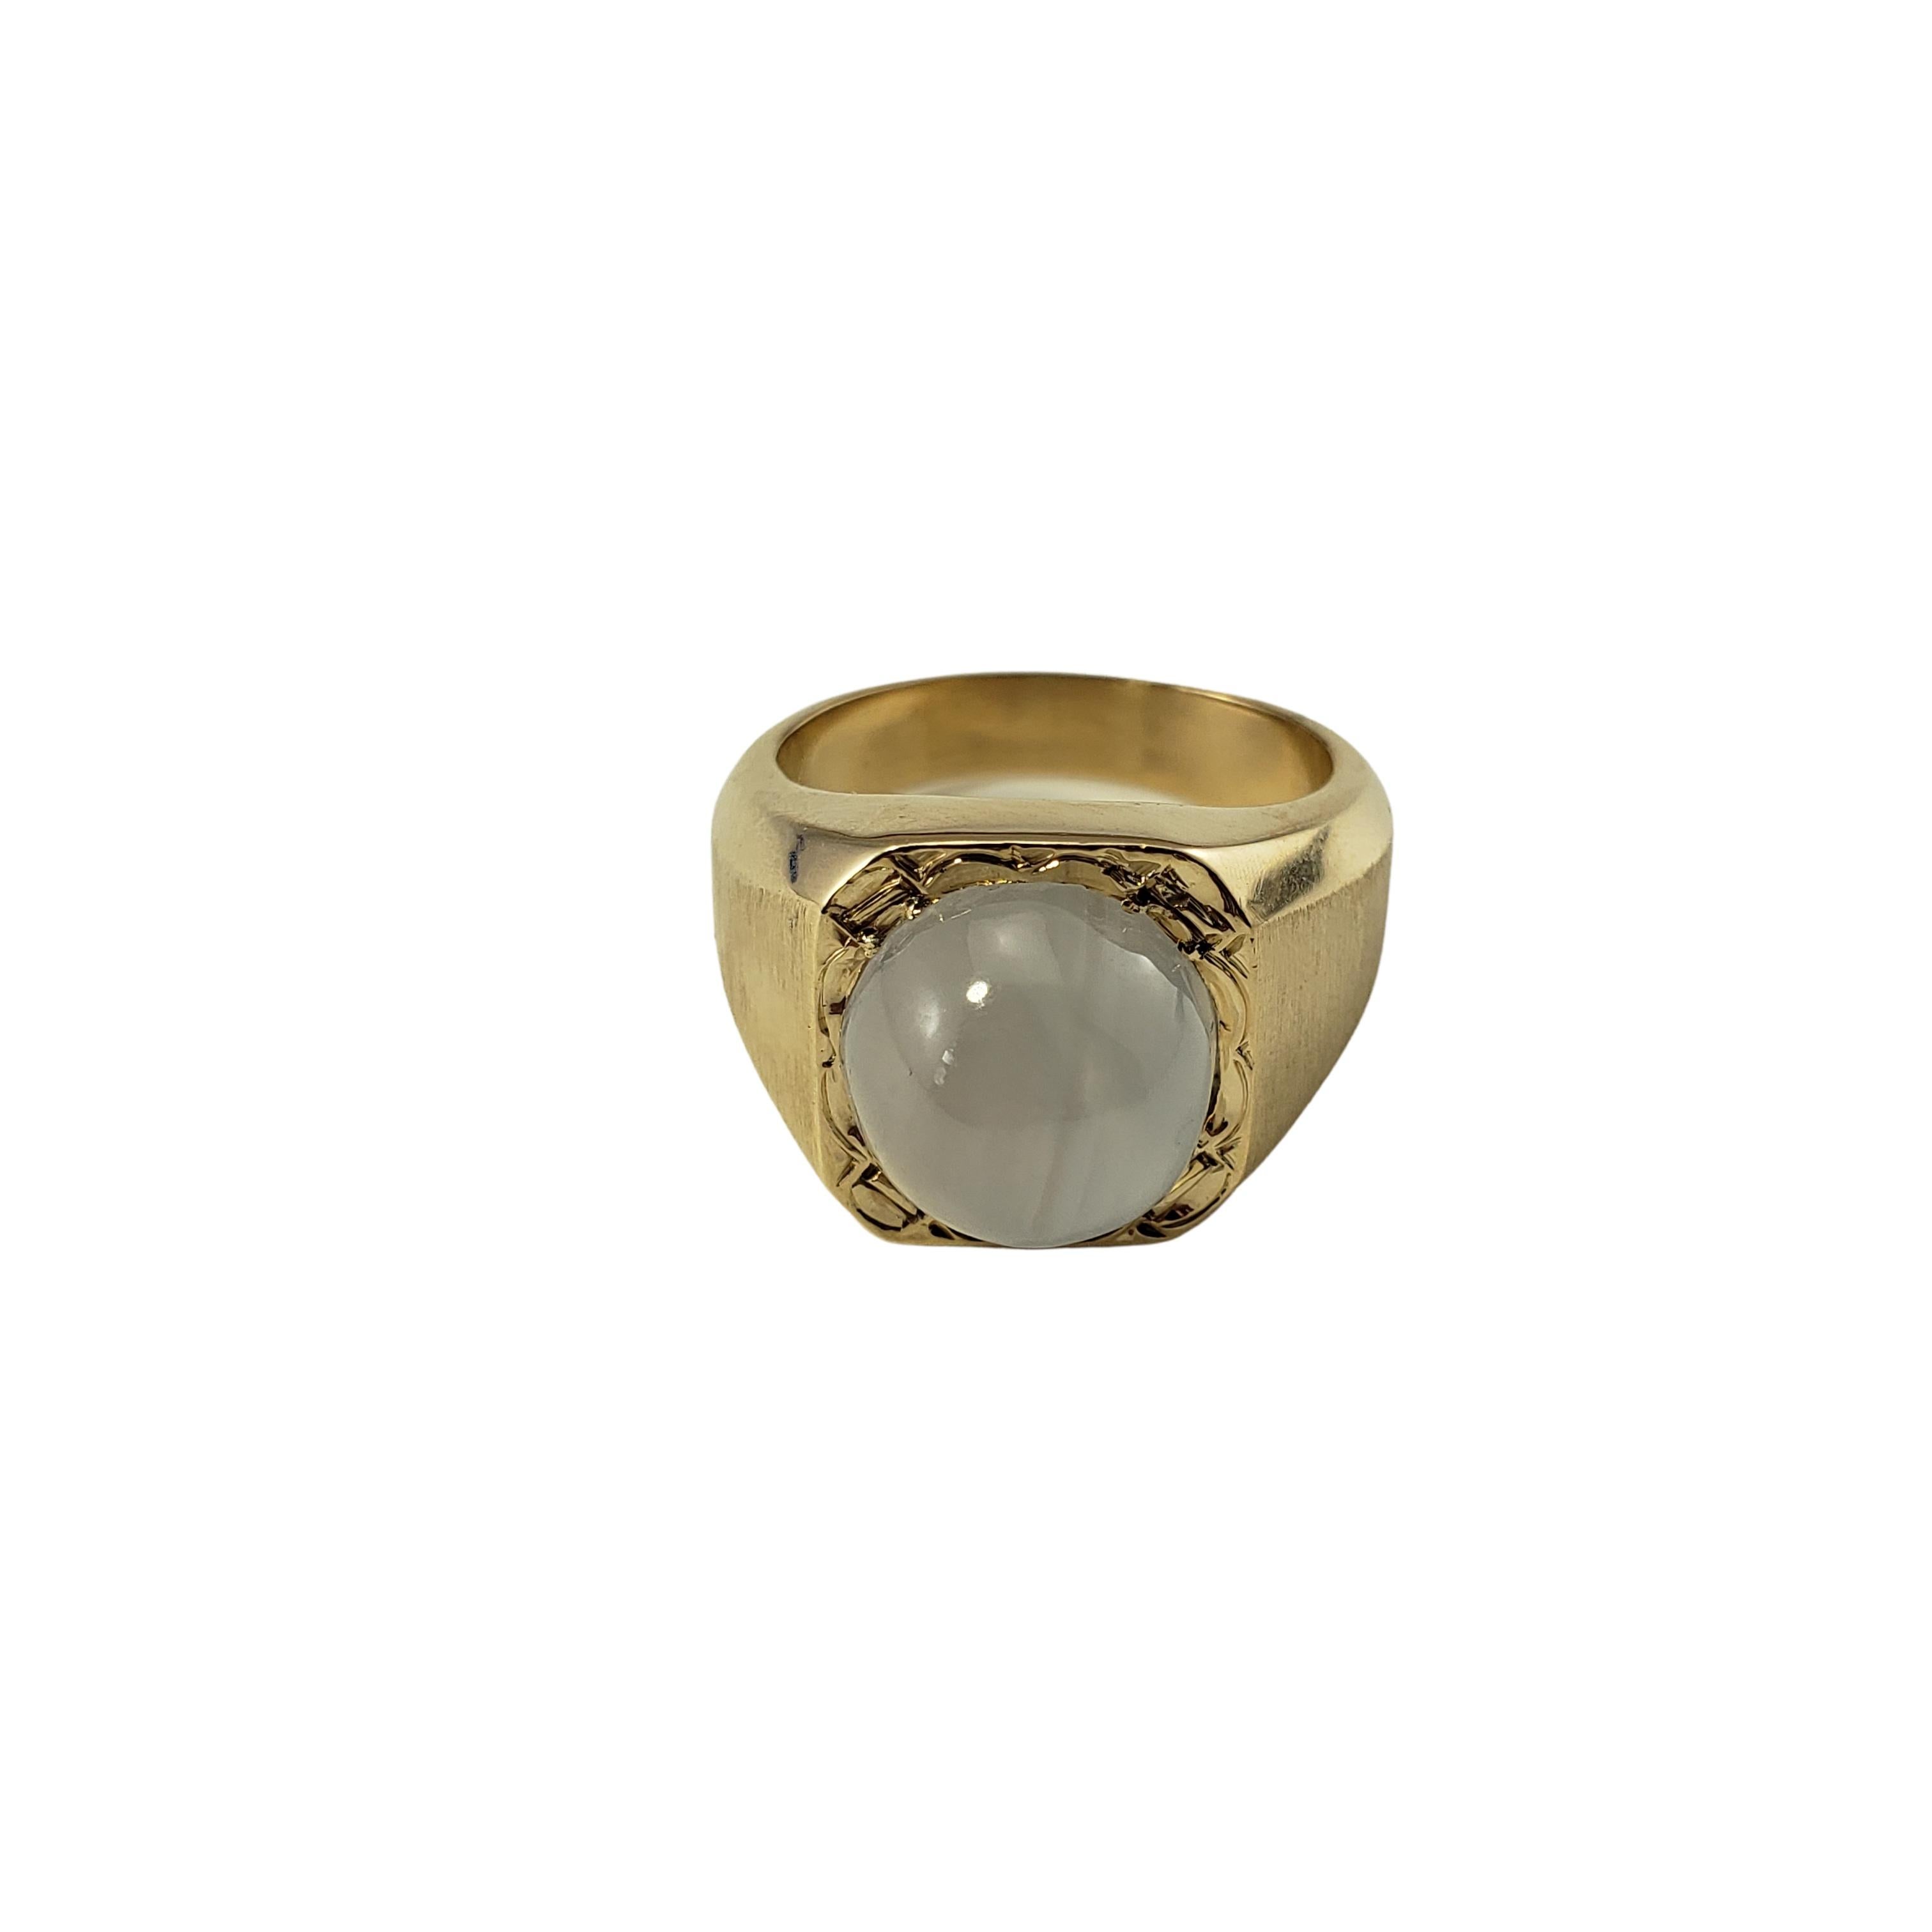 Men's 14 Karat Yellow Gold Star Sapphire Ring Size 8 GAI Certified-

This elegant ring features one star round cabochon sapphire (11 mm) set in classic 14K yellow gold.  Shank: 4 mm.

Sapphire carat weight:  6.36 ct.

Size: 8

Weight:  9.7 dwt. / 